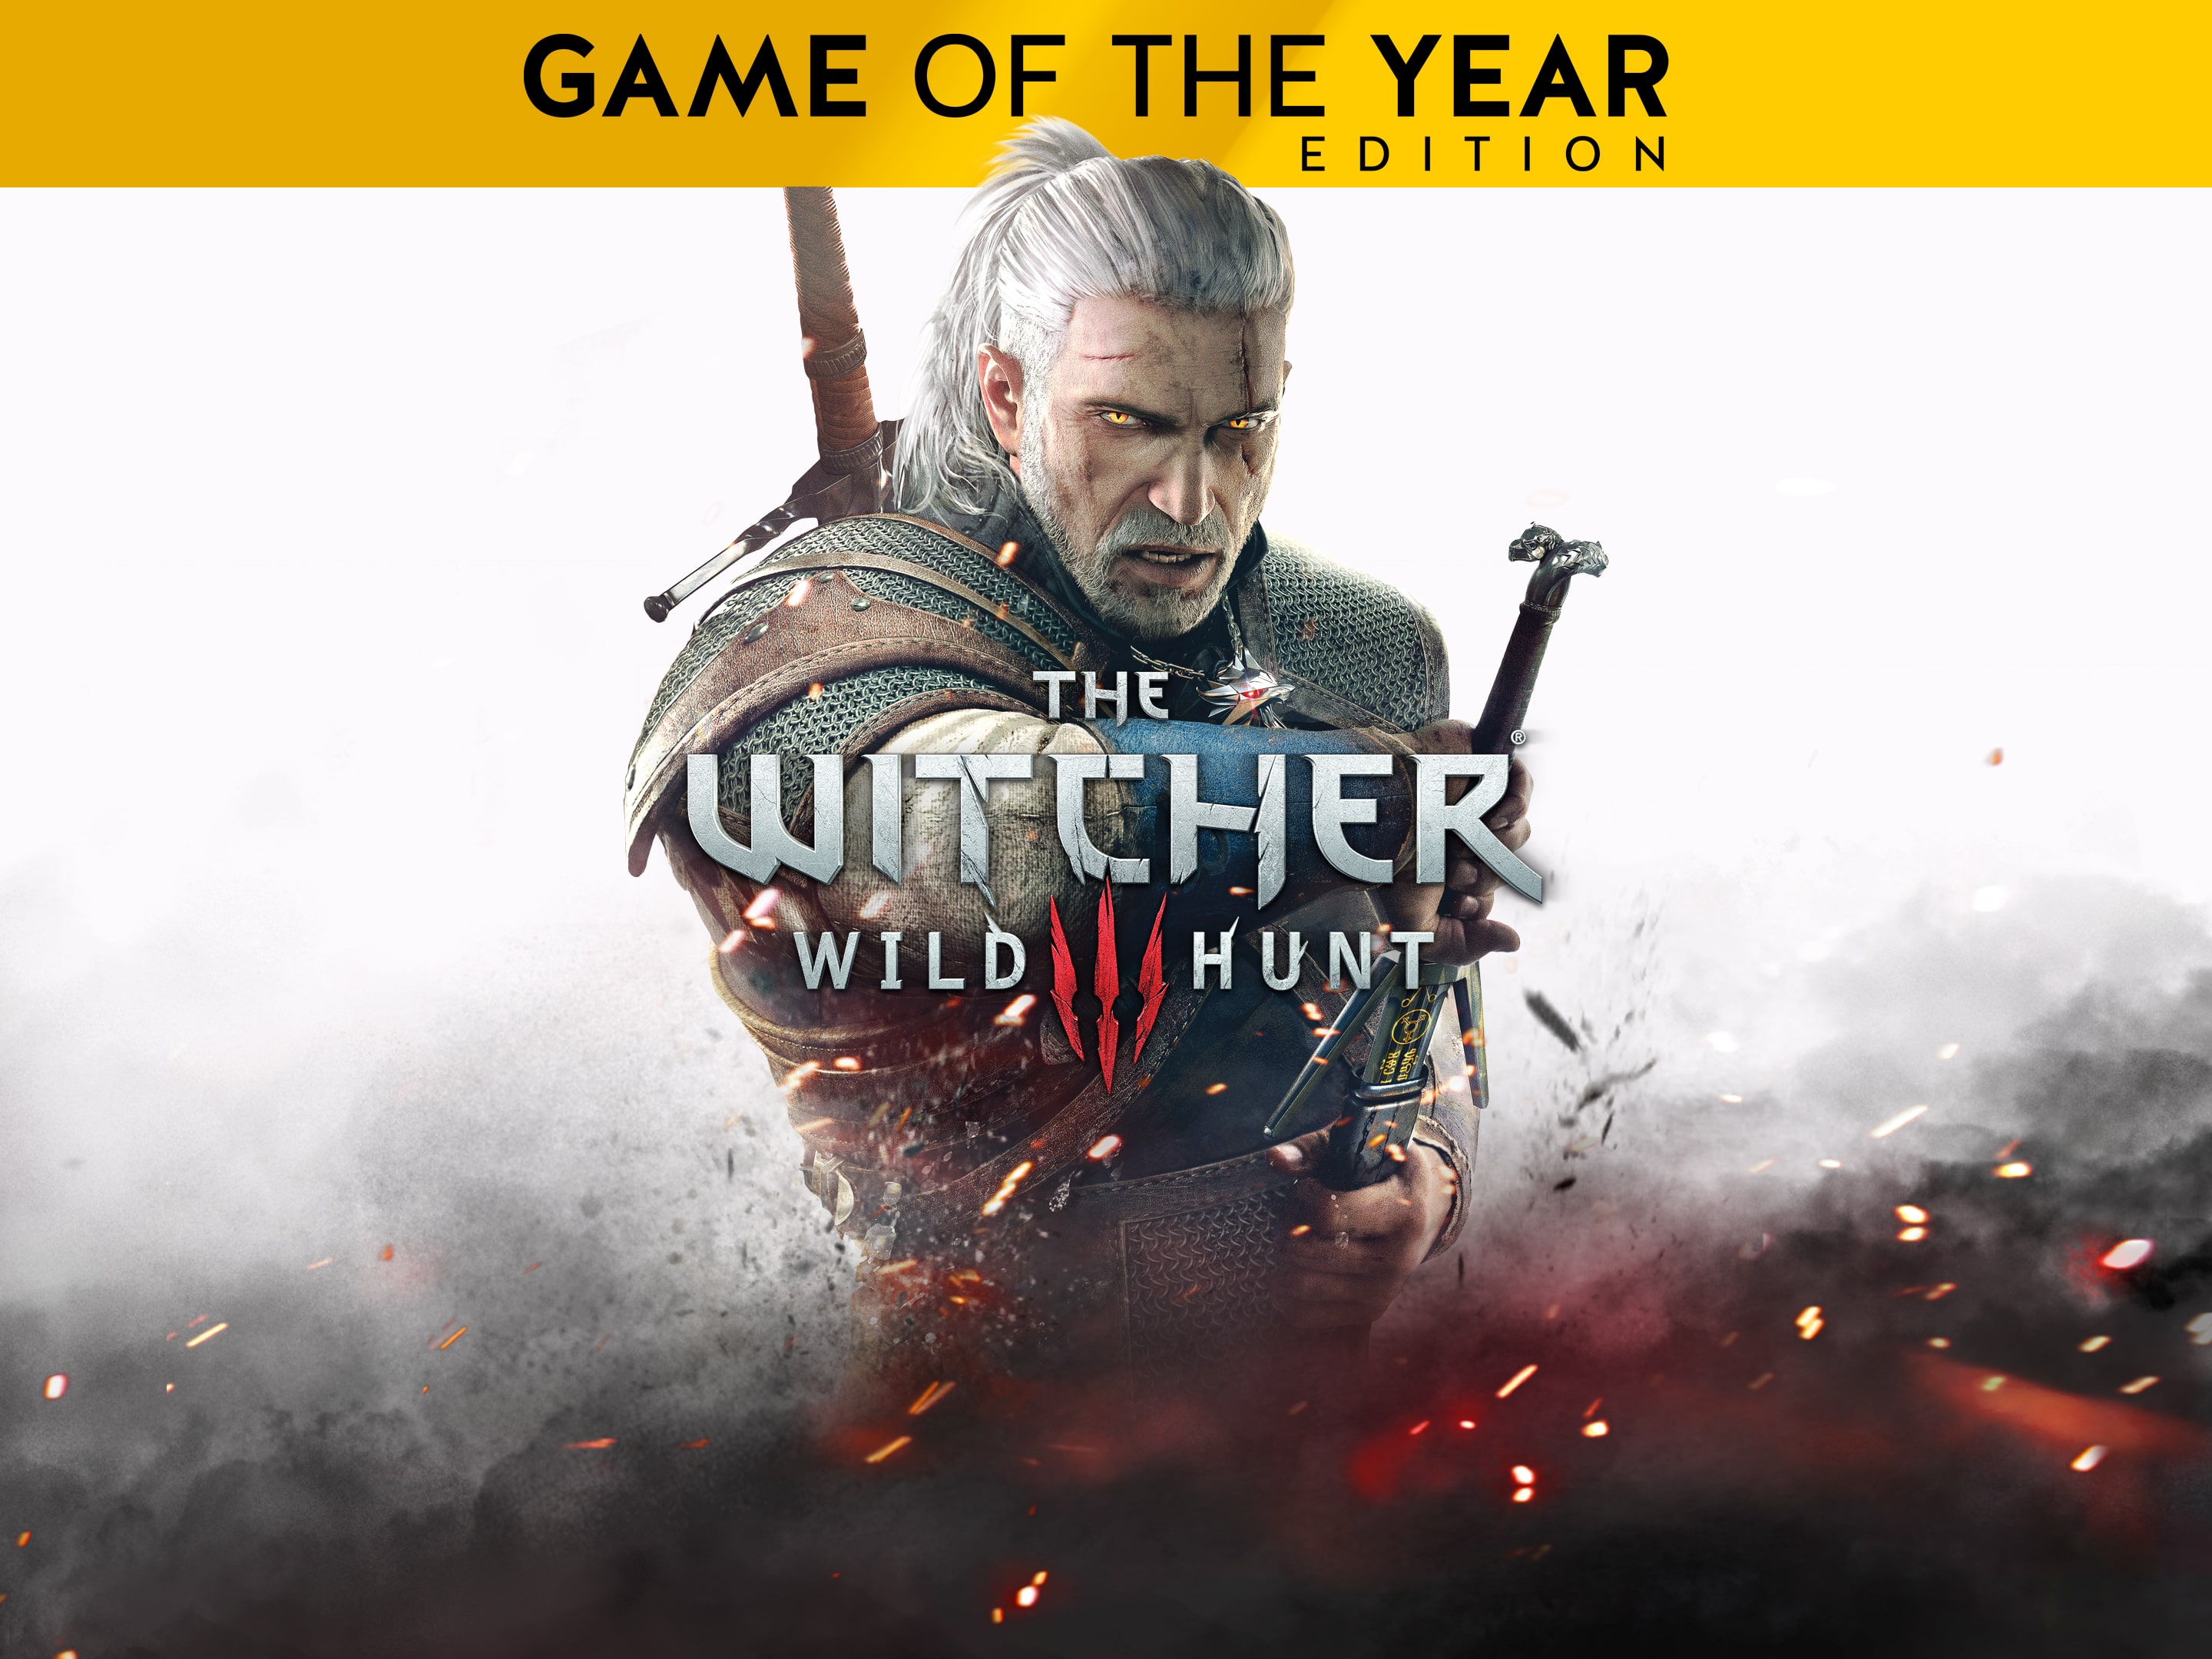 xbox store the witcher